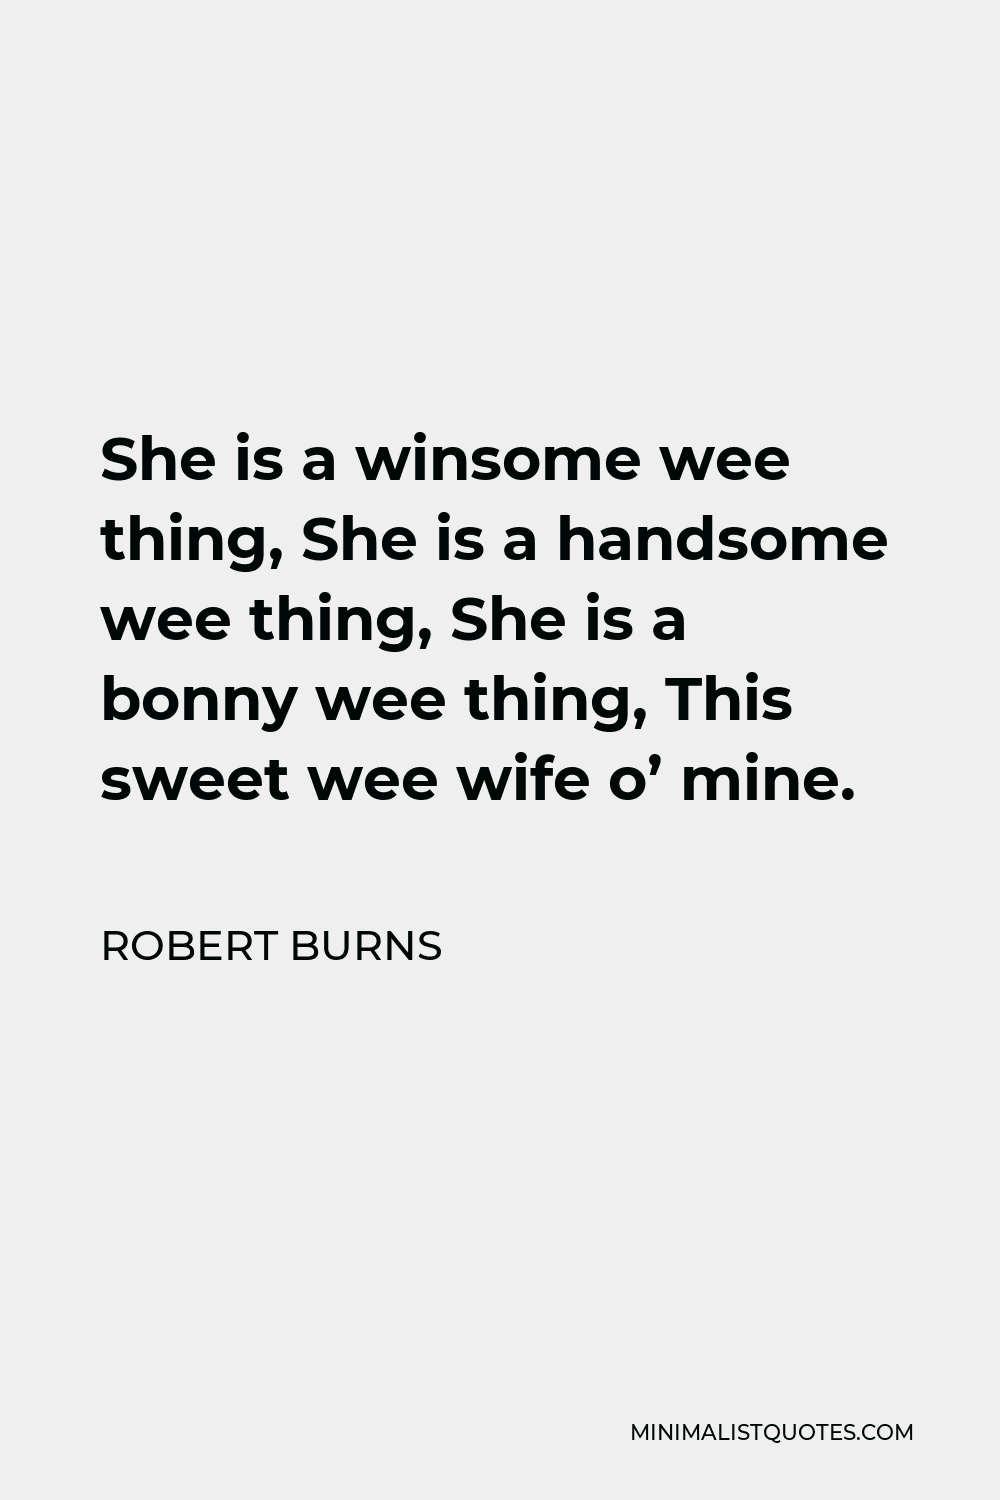 Robert Burns Quote - She is a winsome wee thing, She is a handsome wee thing, She is a bonny wee thing, This sweet wee wife o’ mine.